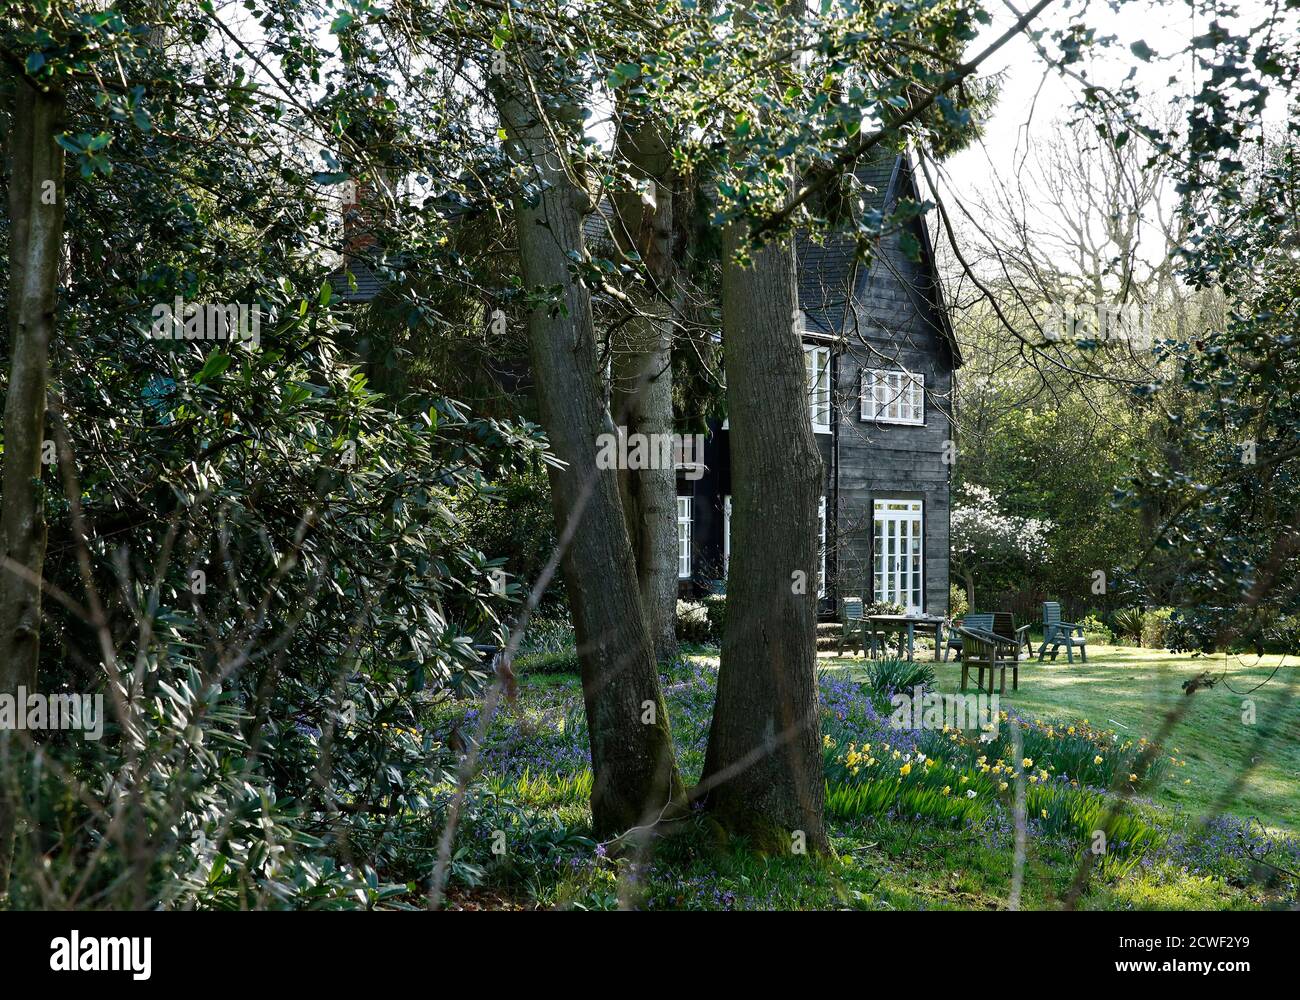 The house of Peaches Geldof is seen the day after she was found dead at her home near Wrotham, southern England April 8, 2014. Geldof, second daughter of Band Aid founder and musician Bob Geldof and a media and fashion personality in her own right, has died at her home in Kent, southern England, aged 25, her family said on Monday. Kent police issued a statement saying the death of a 25-year-old woman, whom they did not identify, was being treated as a 'non-suspicious but unexplained sudden death'.  REUTERS/Olivia Harris (BRITAIN - Tags: SOCIETY) Stock Photo